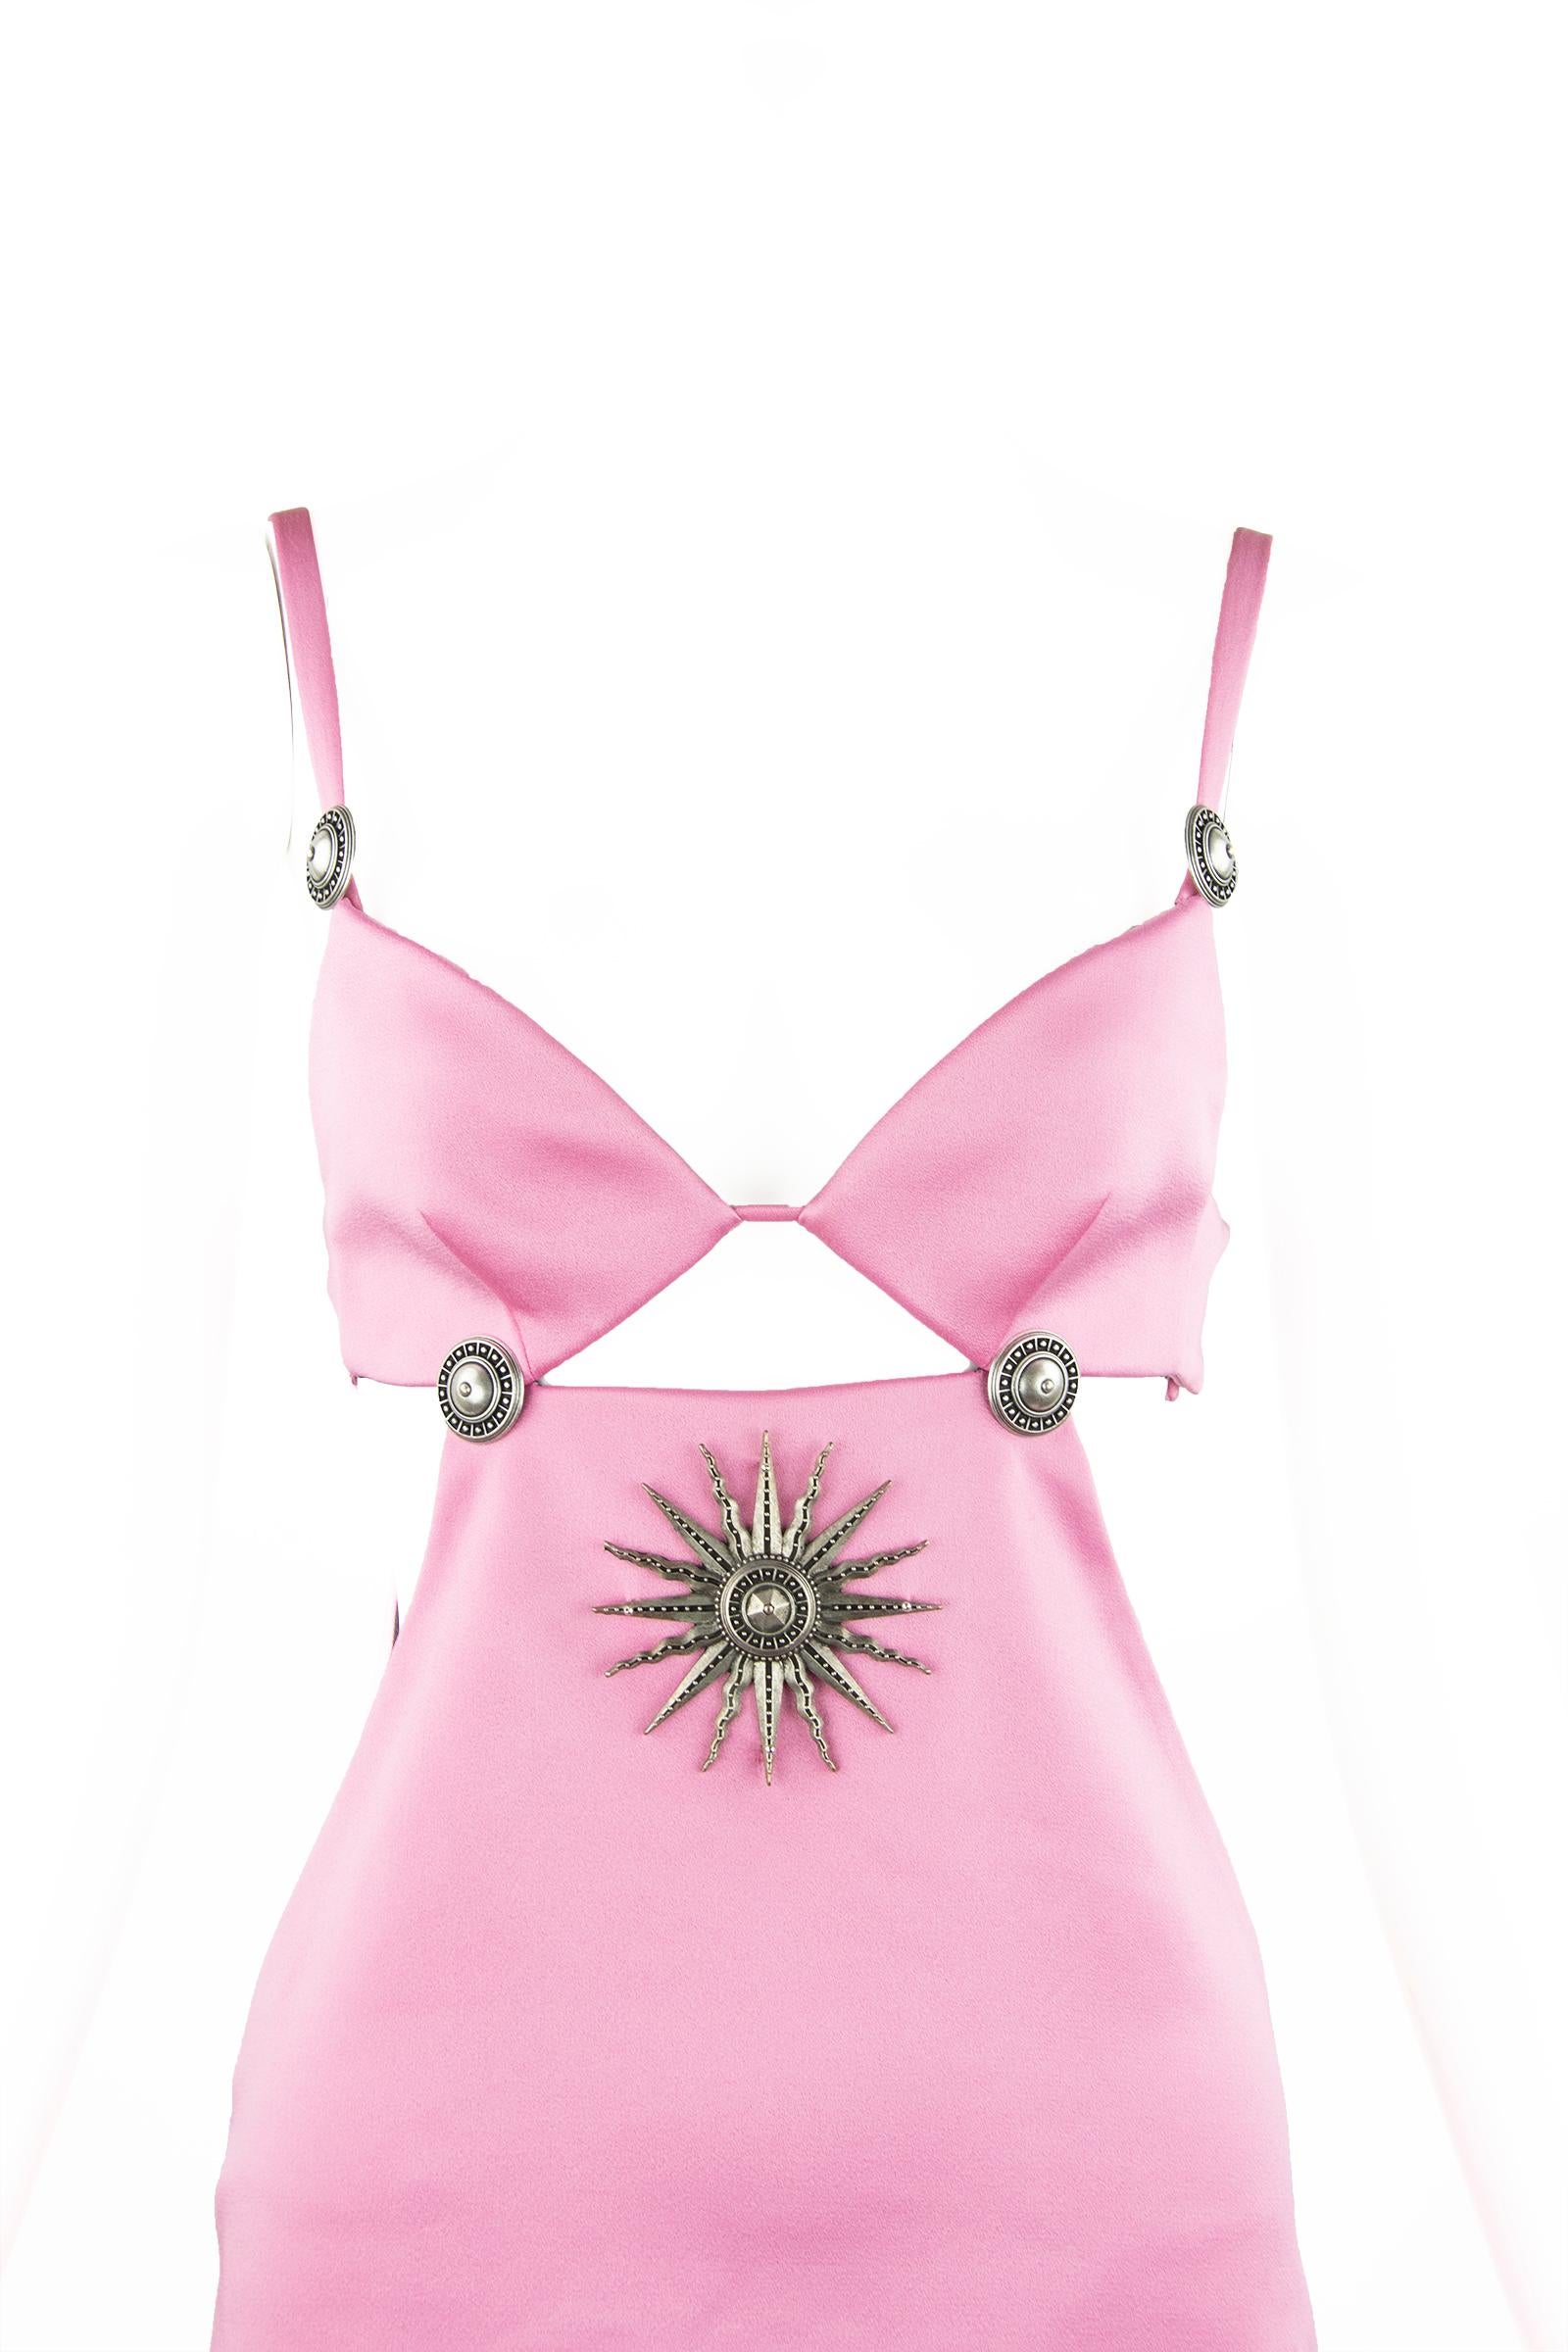 Fausto Puglisi Pink Cut Out Dress with Medallions  Damen